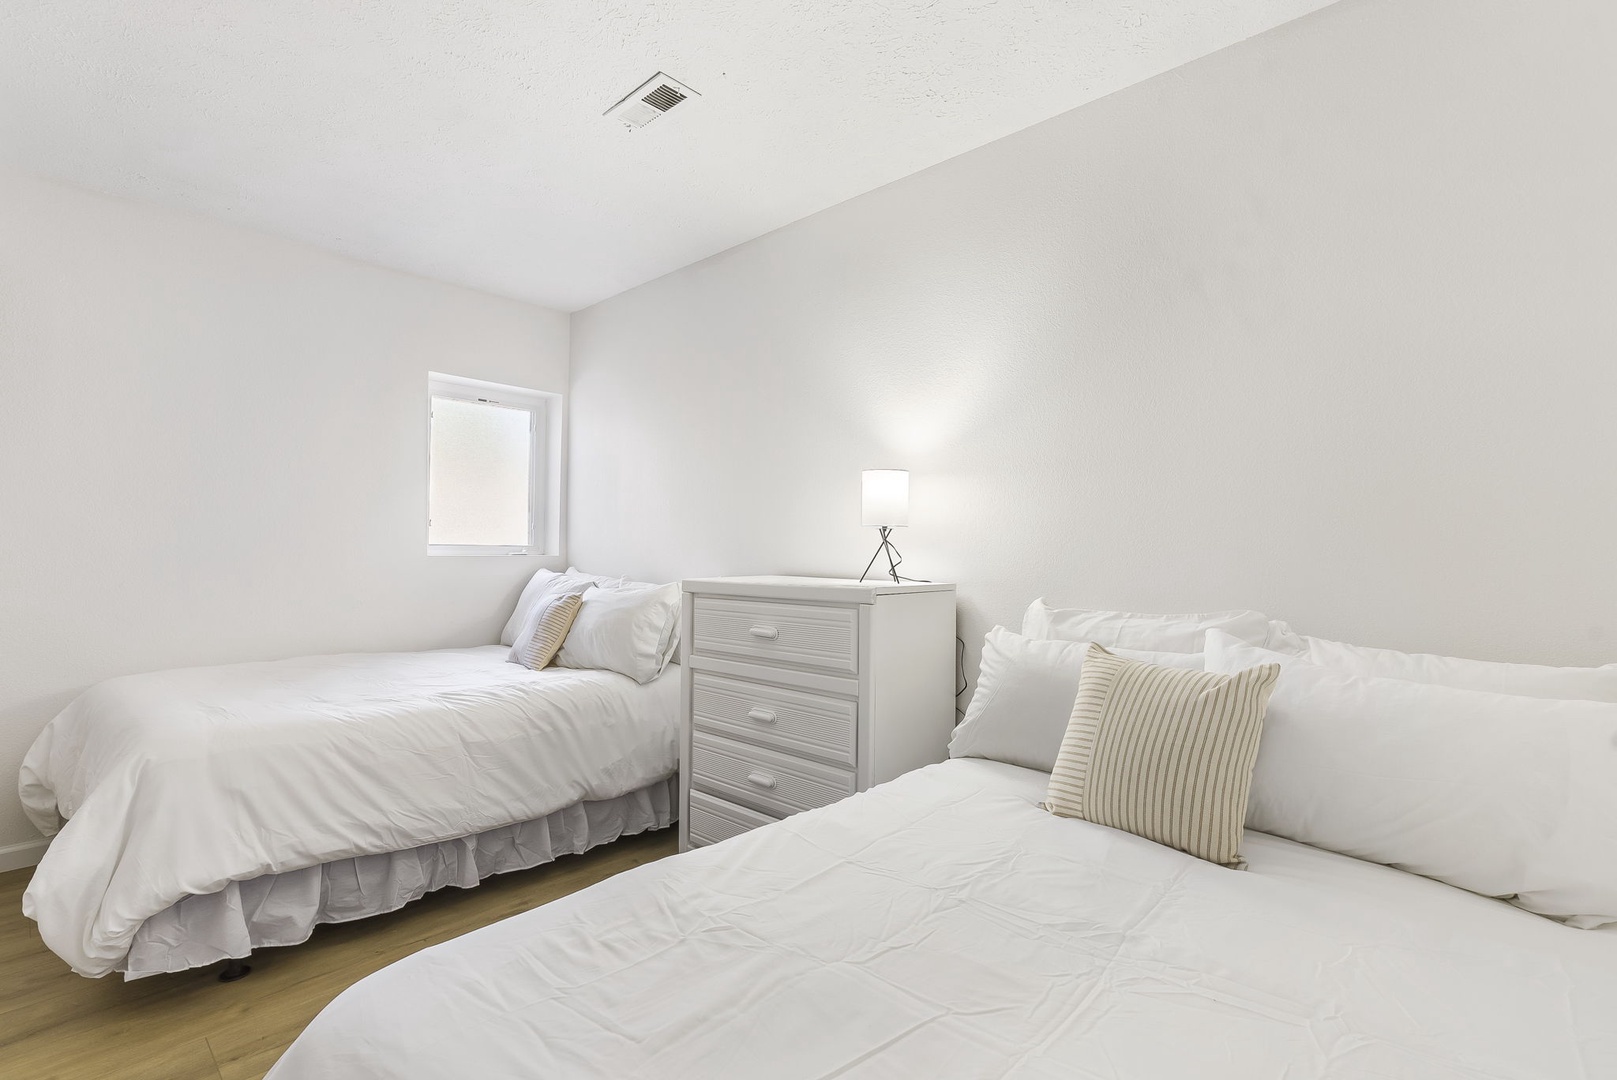 This 1st floor bedroom includes a pair of cozy full-sized beds